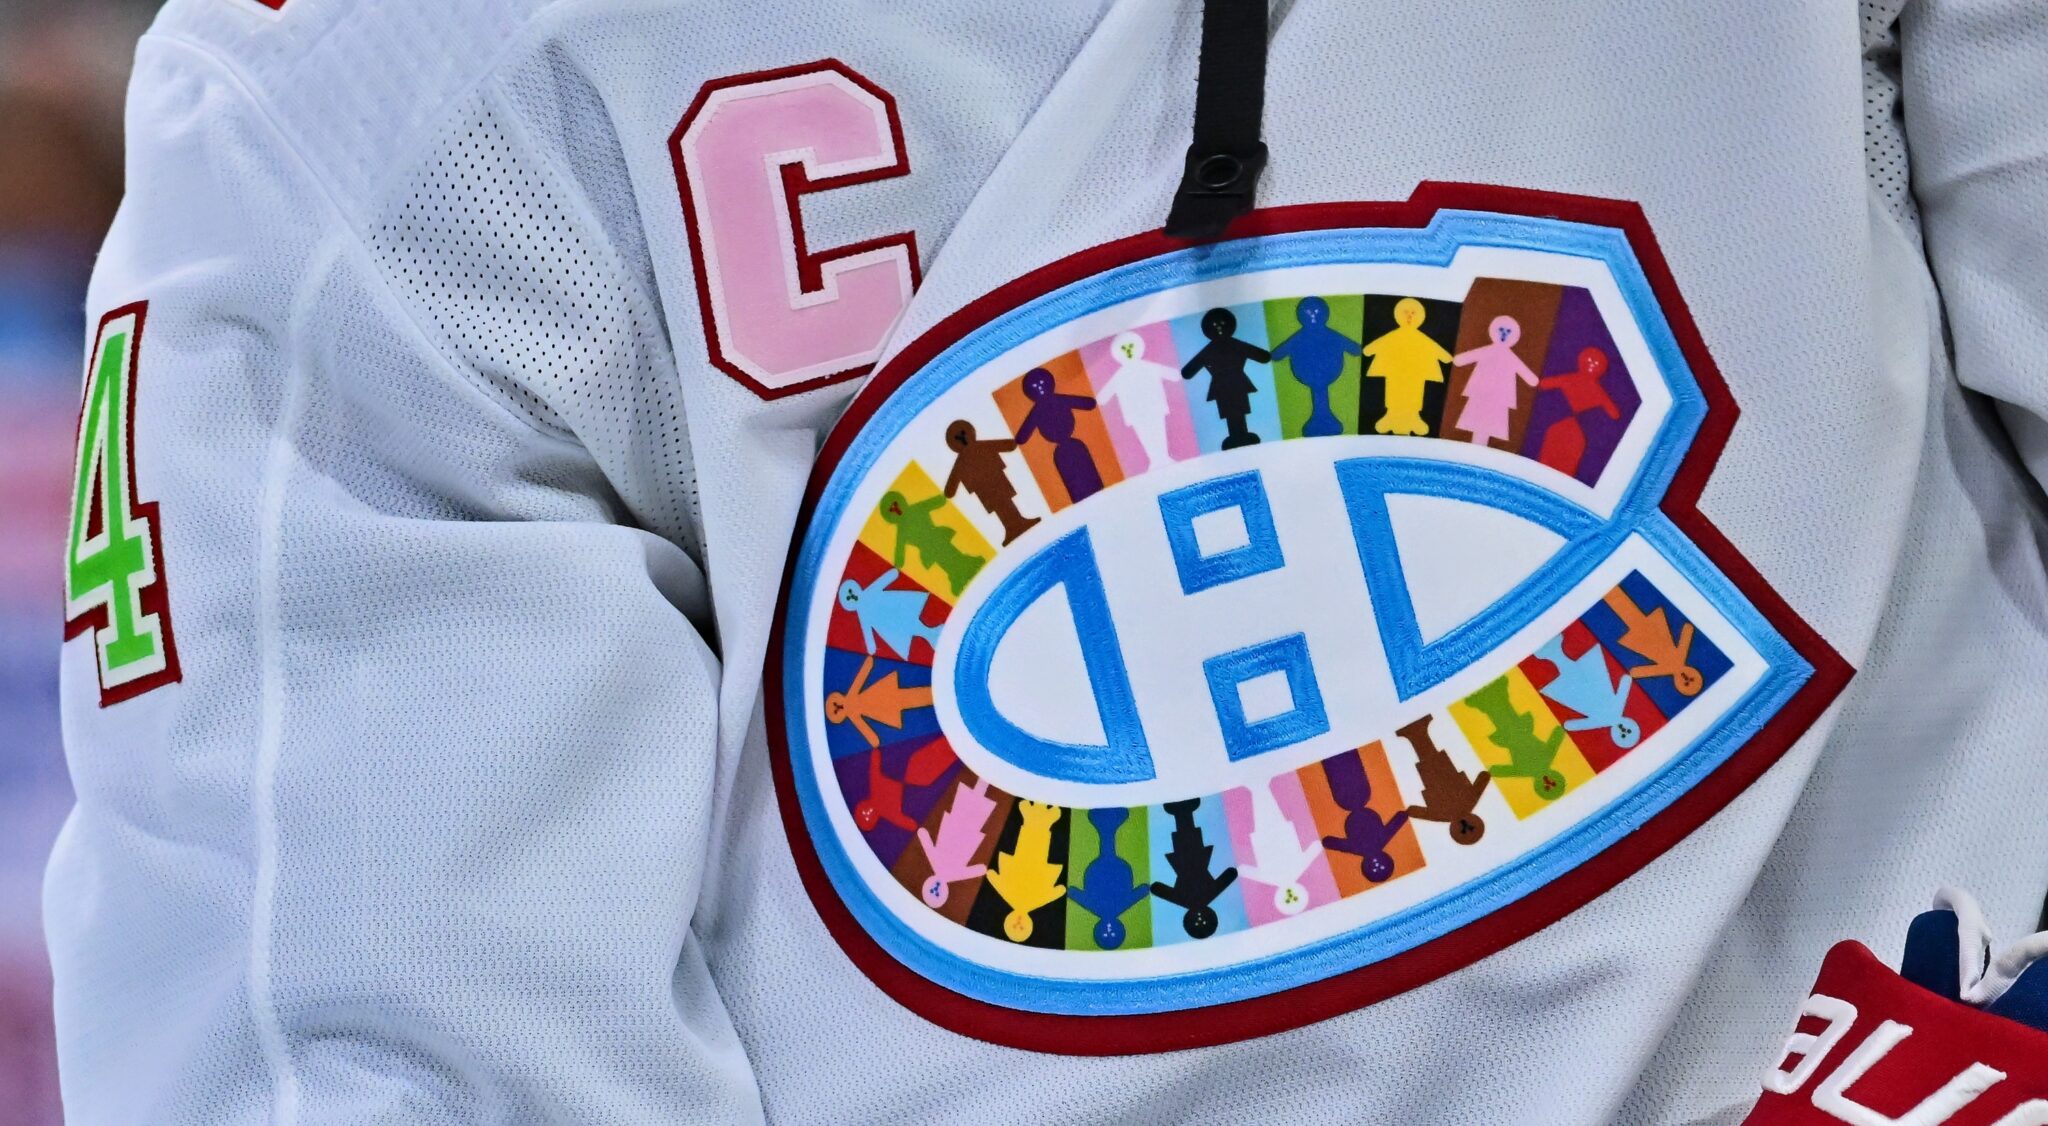 NHL Makes Significant Announcement About “Pride Jerseys”